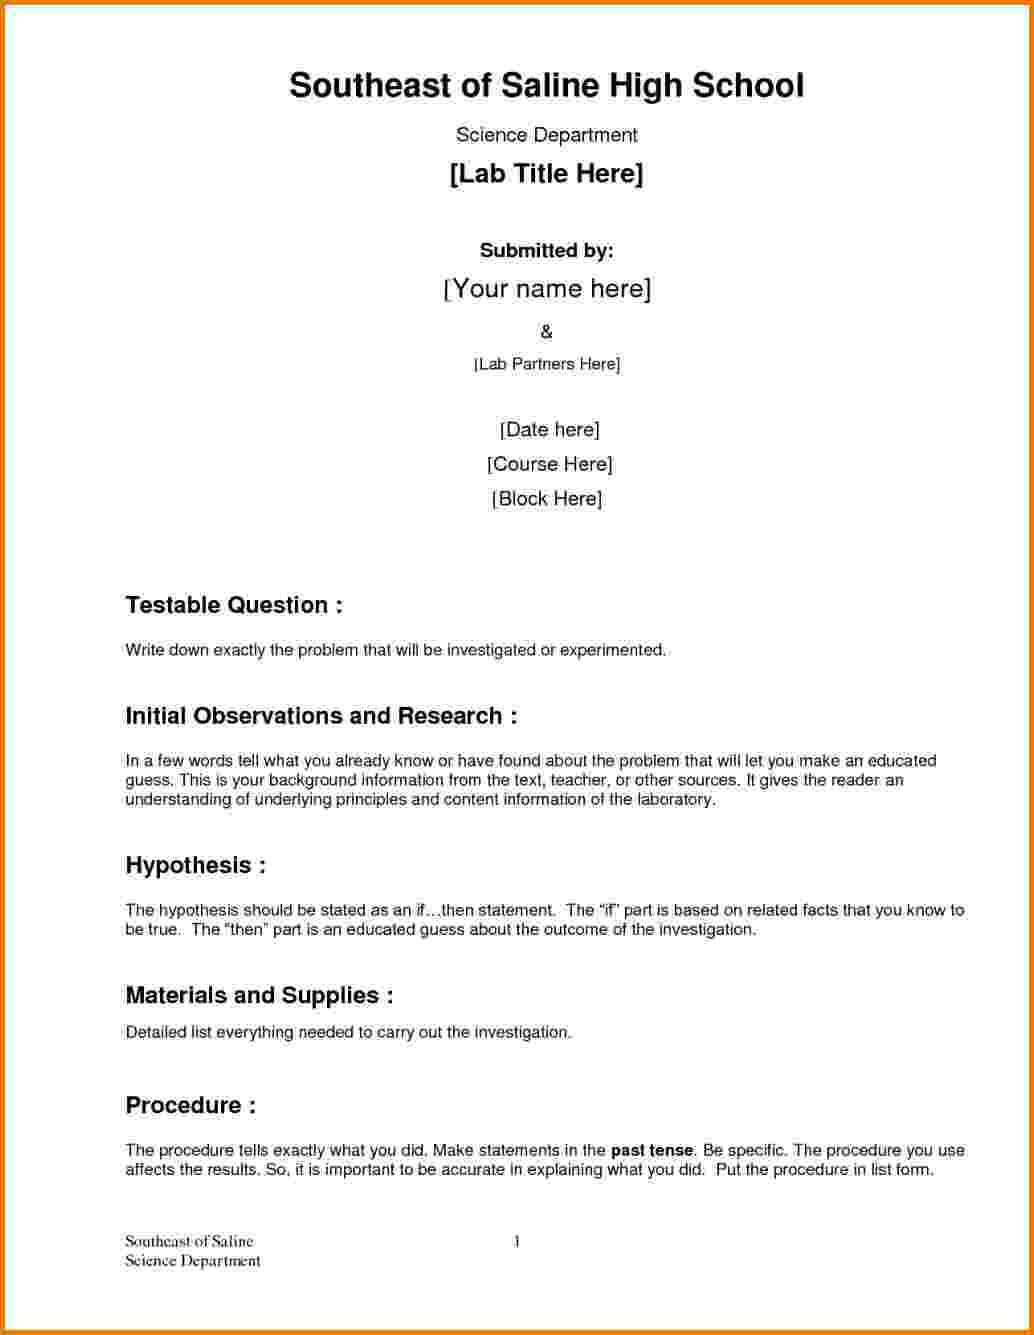 010 Formal Lab Report Template 1024X1325 Frightening Ideas Intended For Engineering Lab Report Template